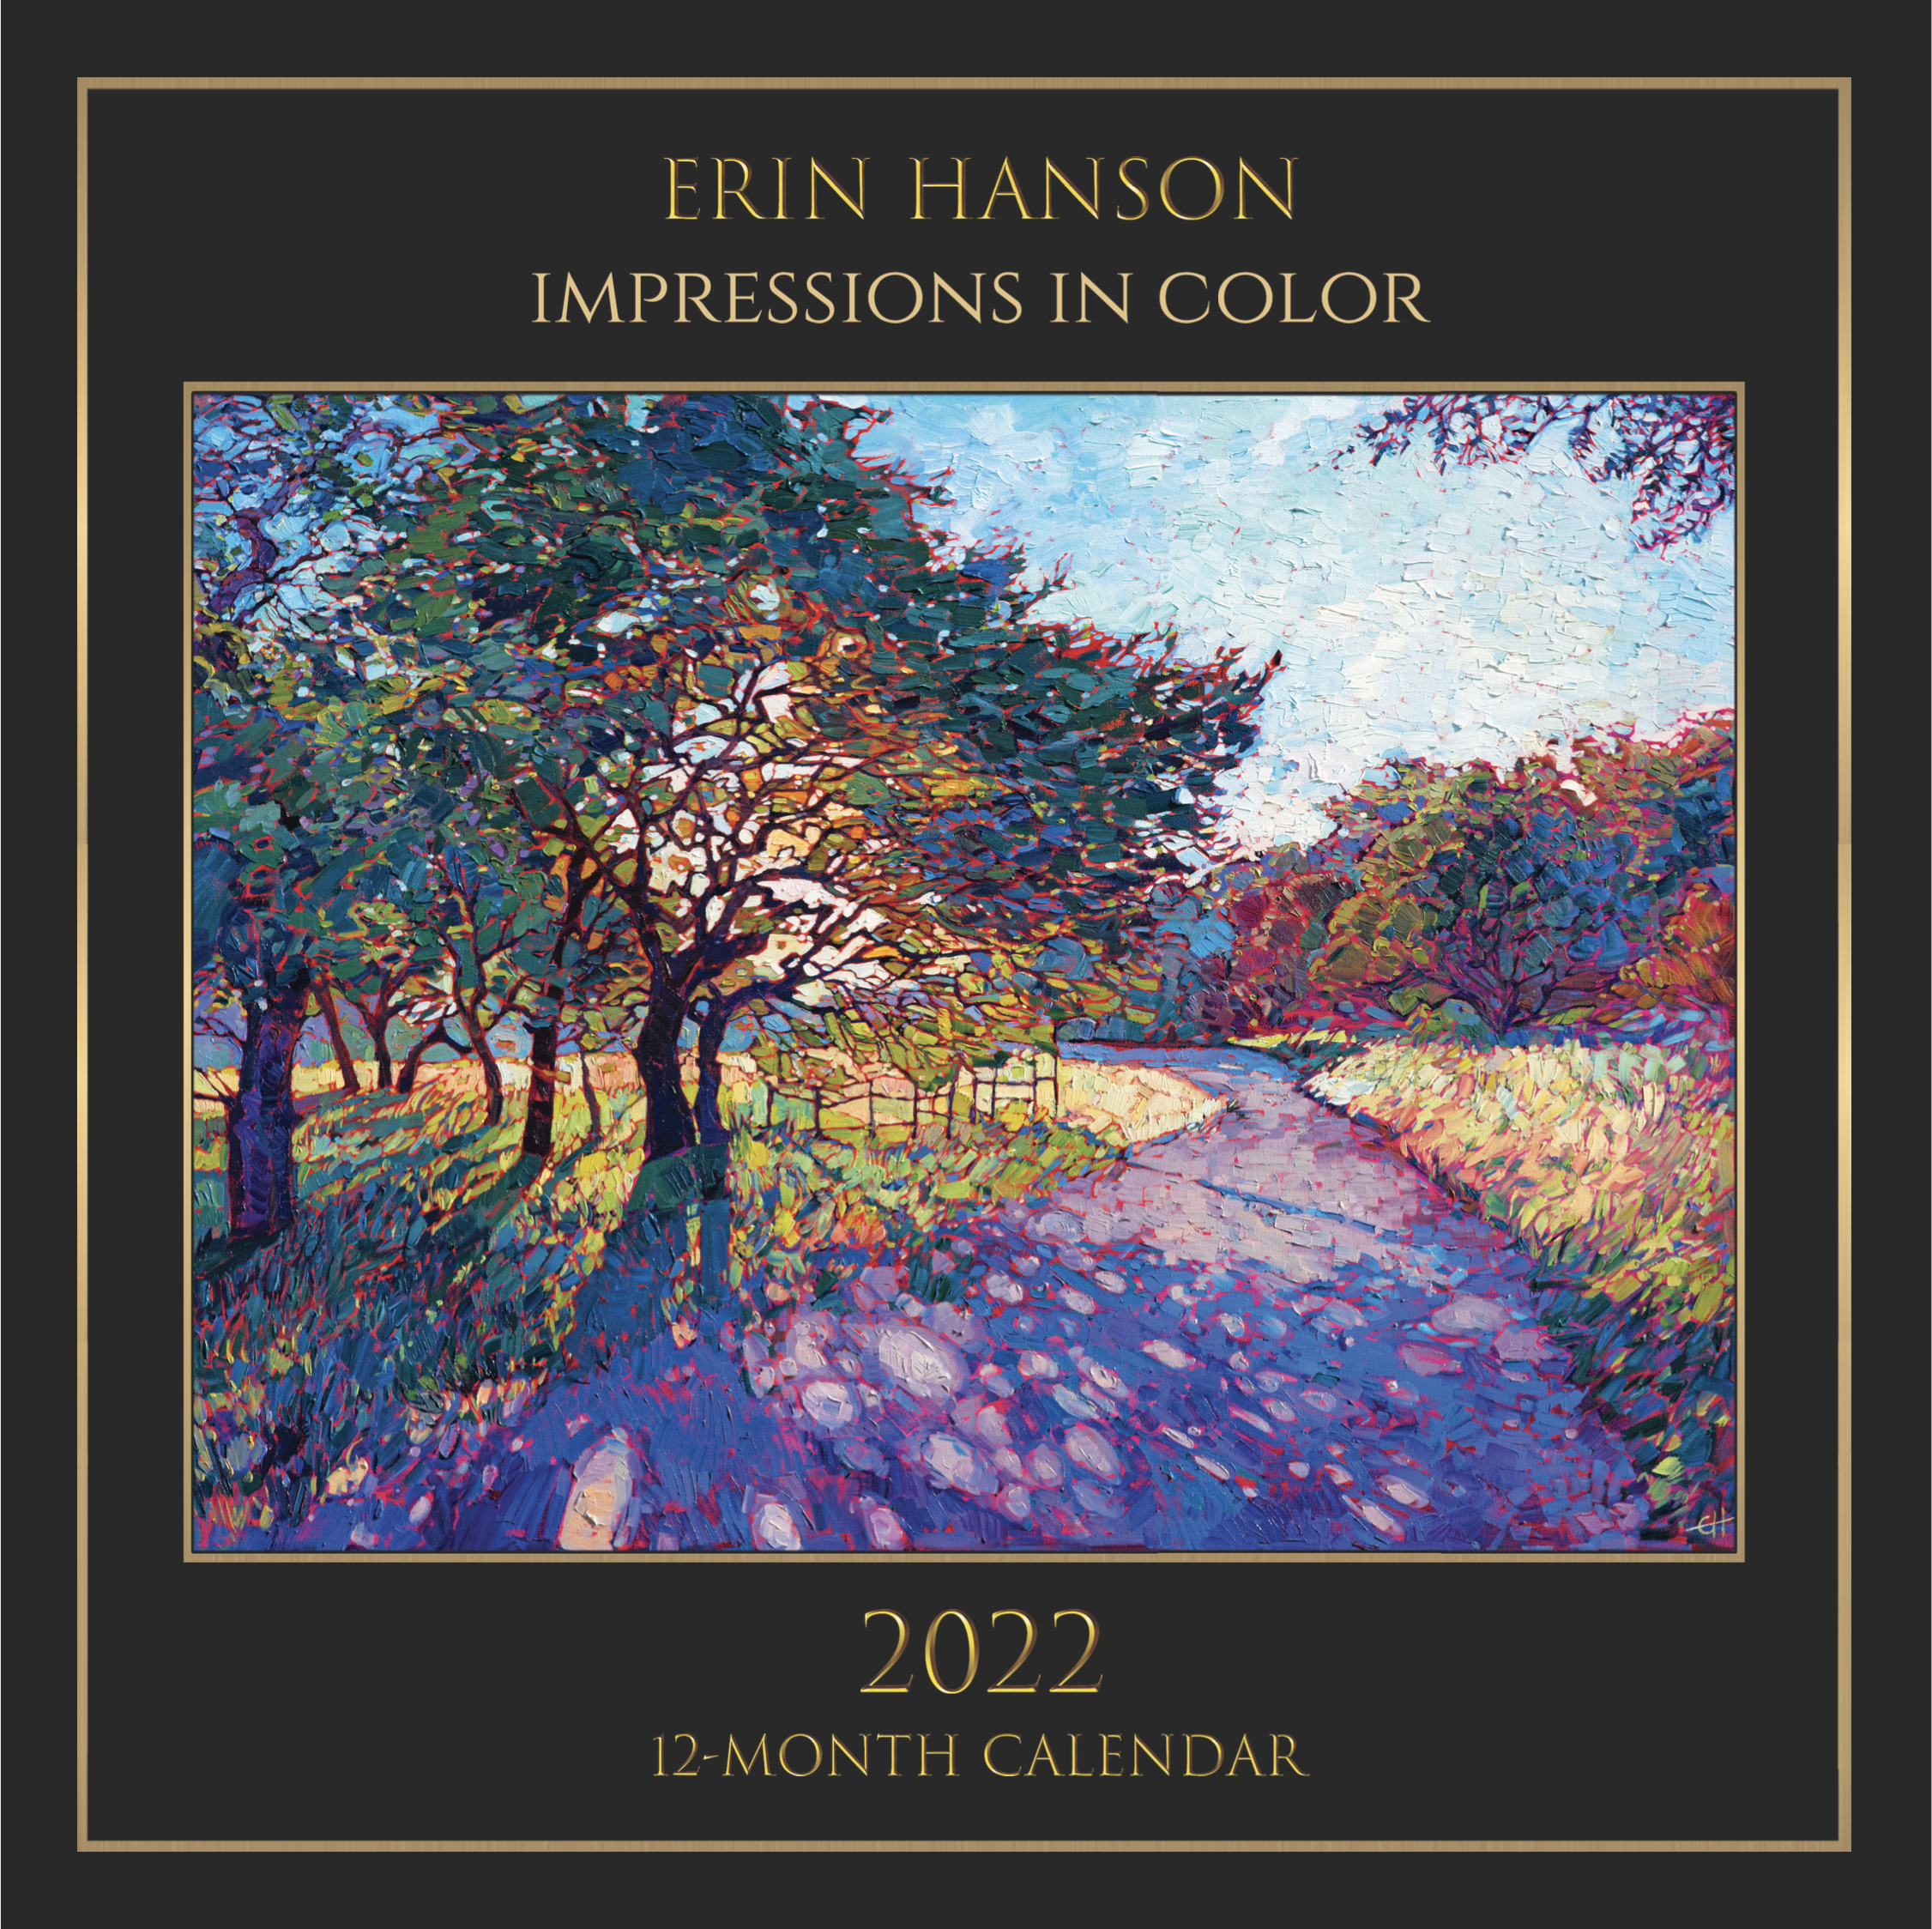 Erin Hanson: Impressions in Color - 2022 Wall Calendar [SOLD OUT]